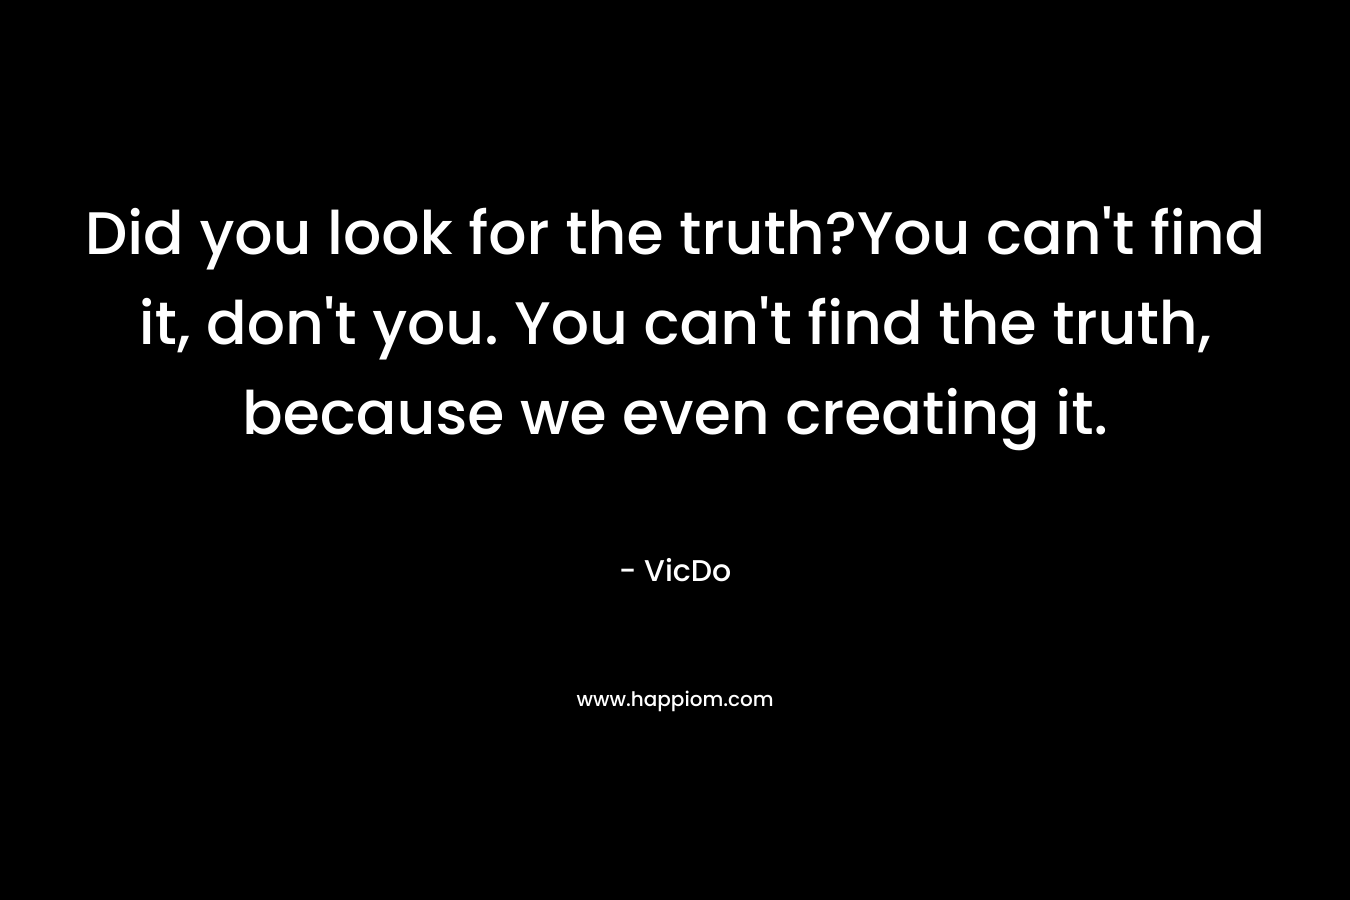 Did you look for the truth?You can't find it, don't you. You can't find the truth, because we even creating it.